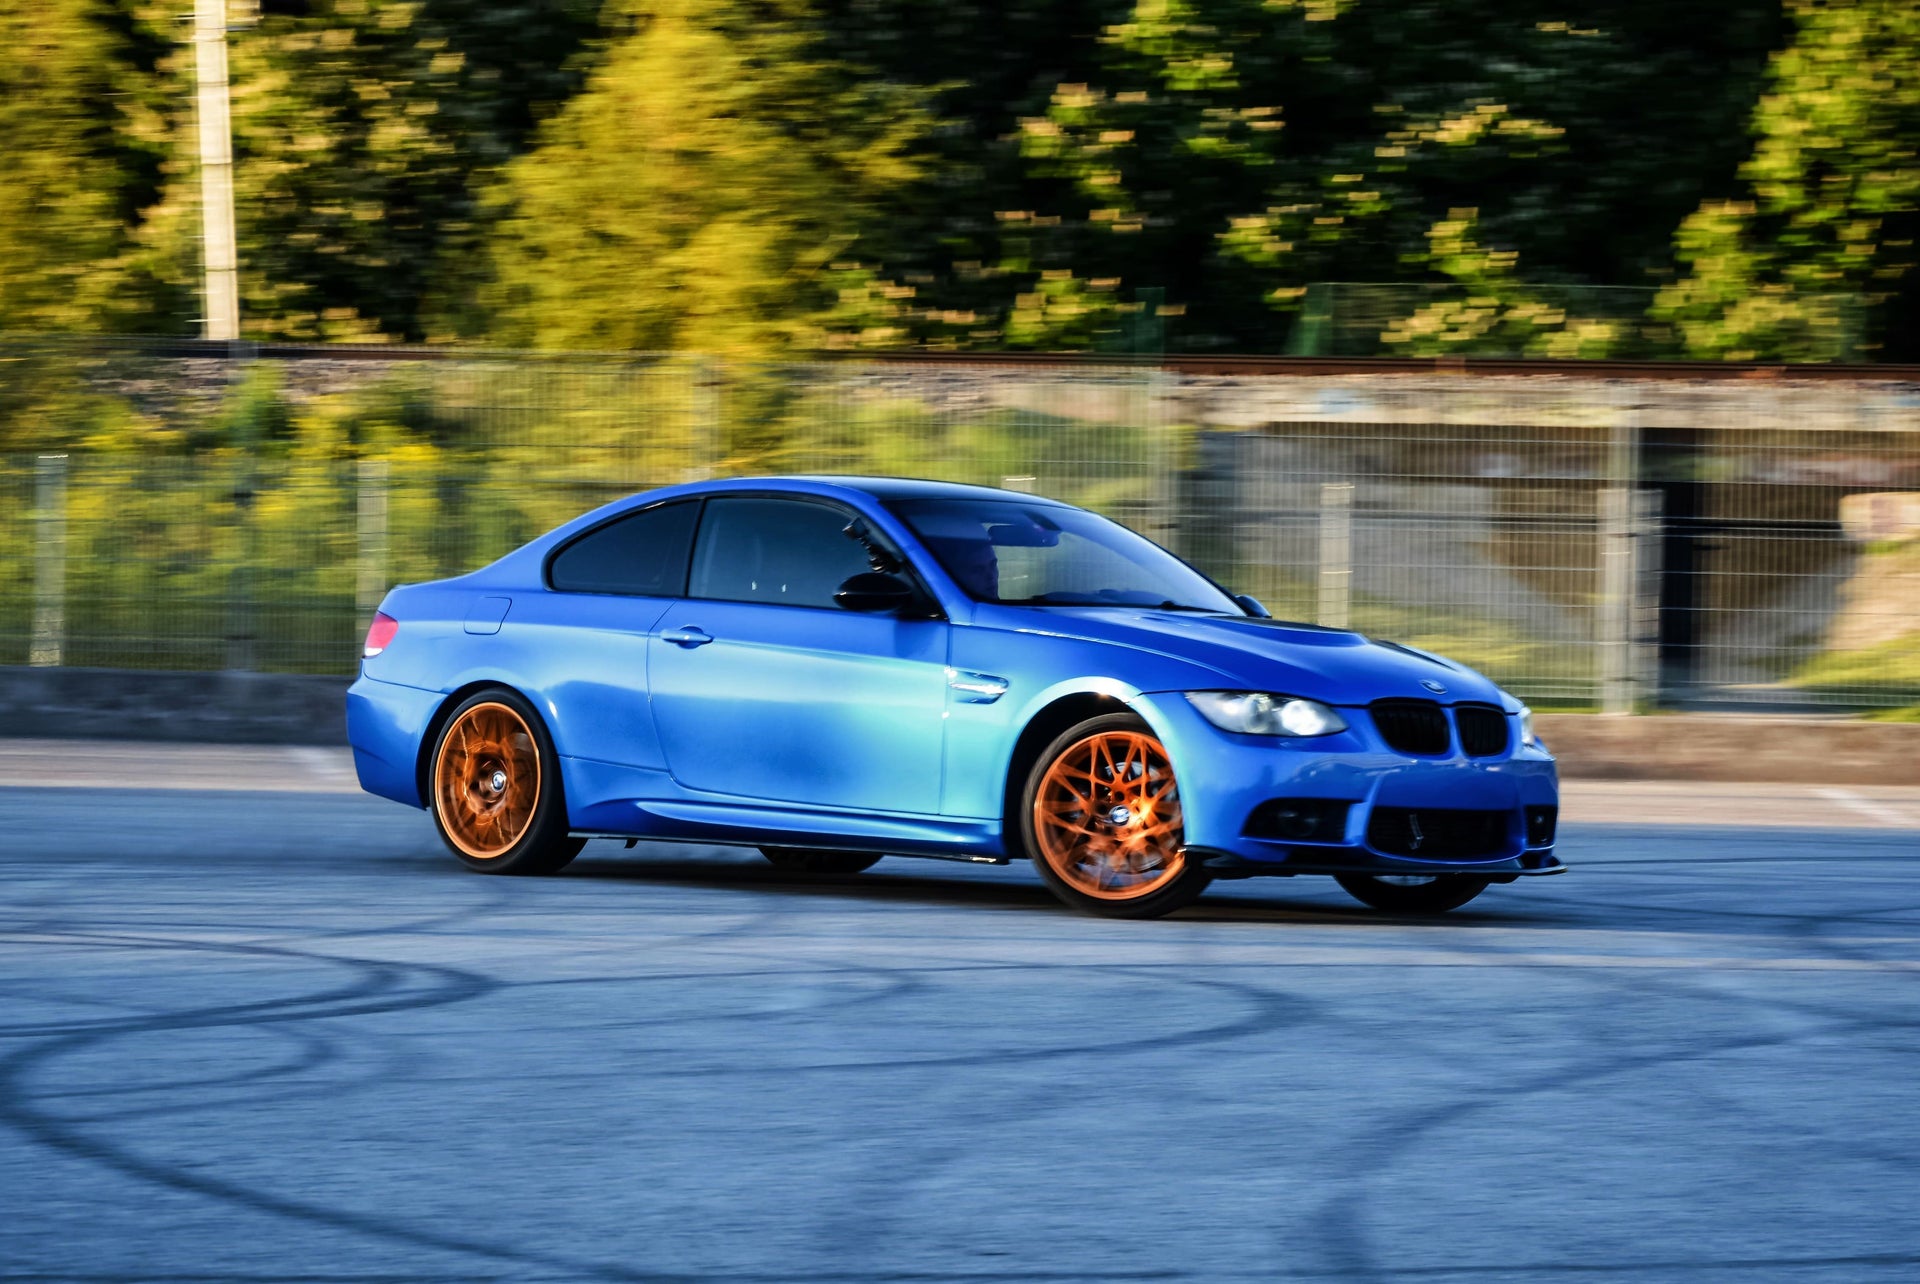 Load video: Urban racing 335i project made by alternating the original body kits into a shiny blue x orange theme BMW. Racing in the heart of Estonia - Tallinn.